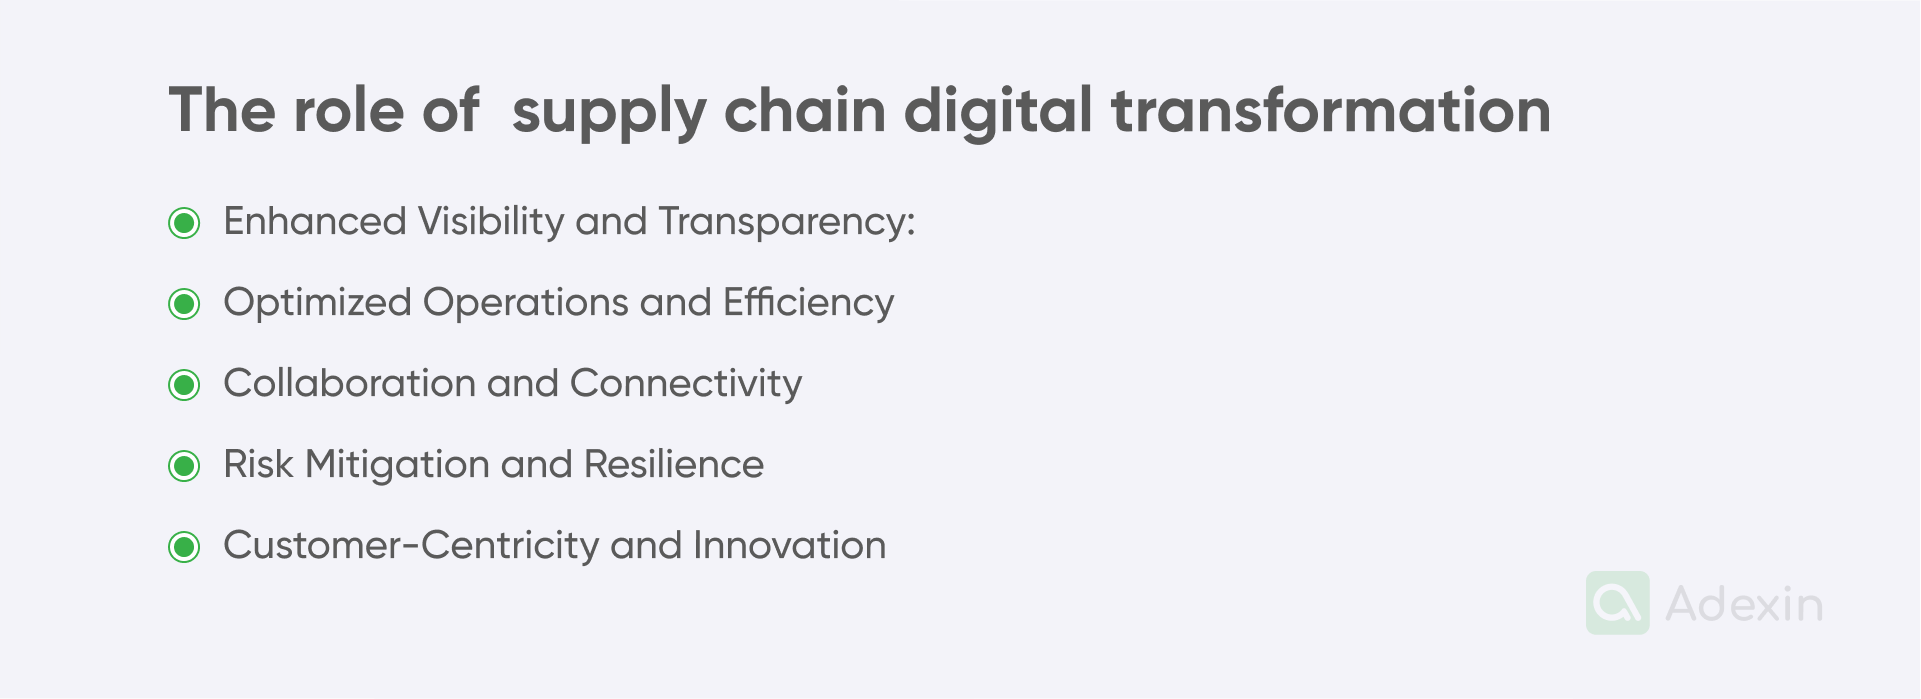 The role of supply chain digital transformation